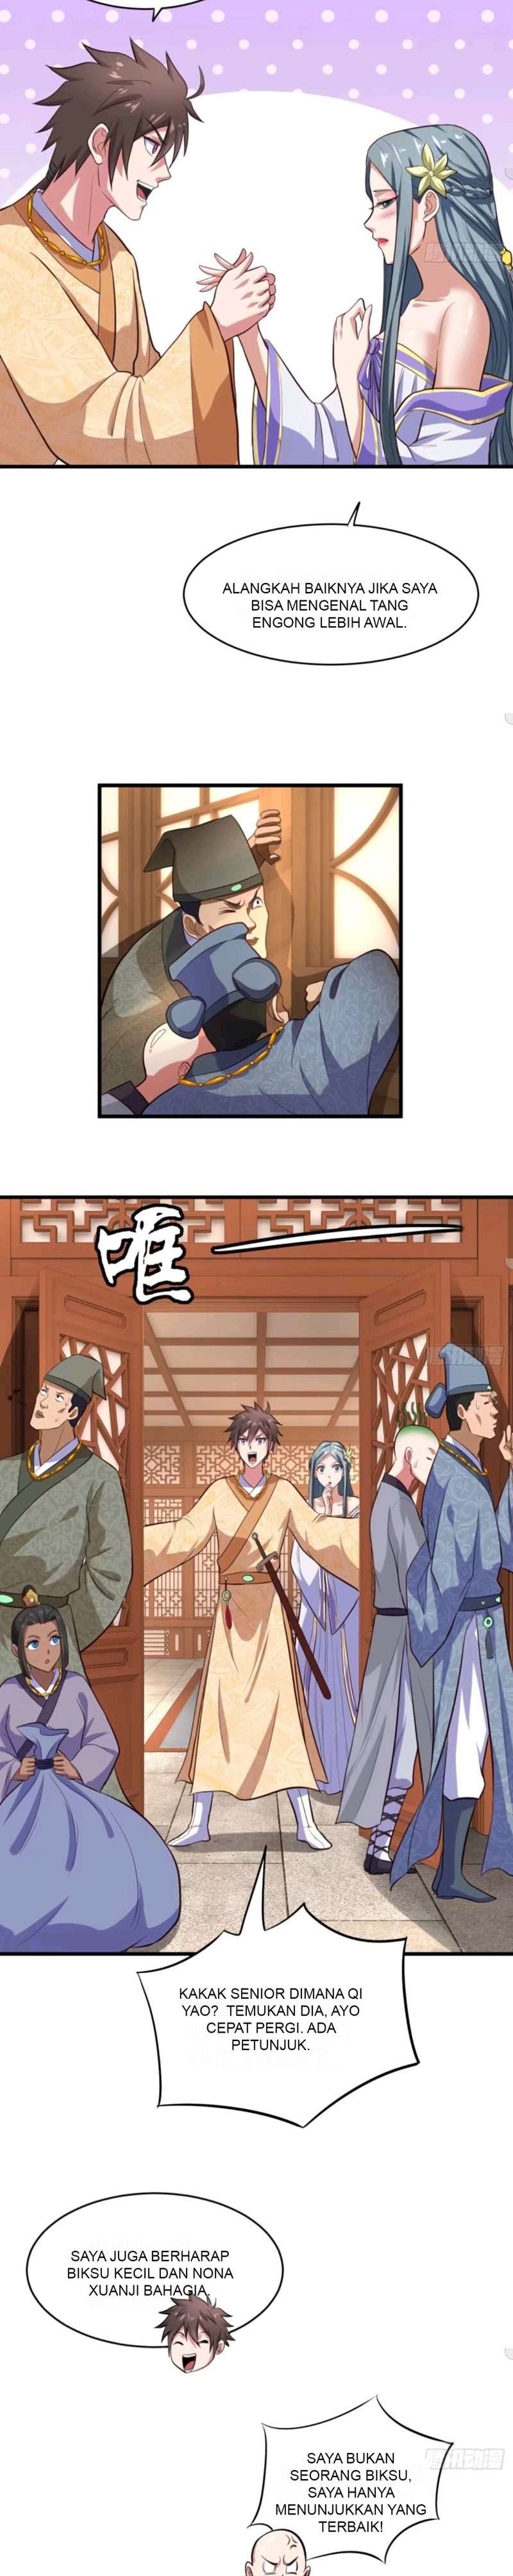 My Harem Depend on Drawing Cards Chapter 61